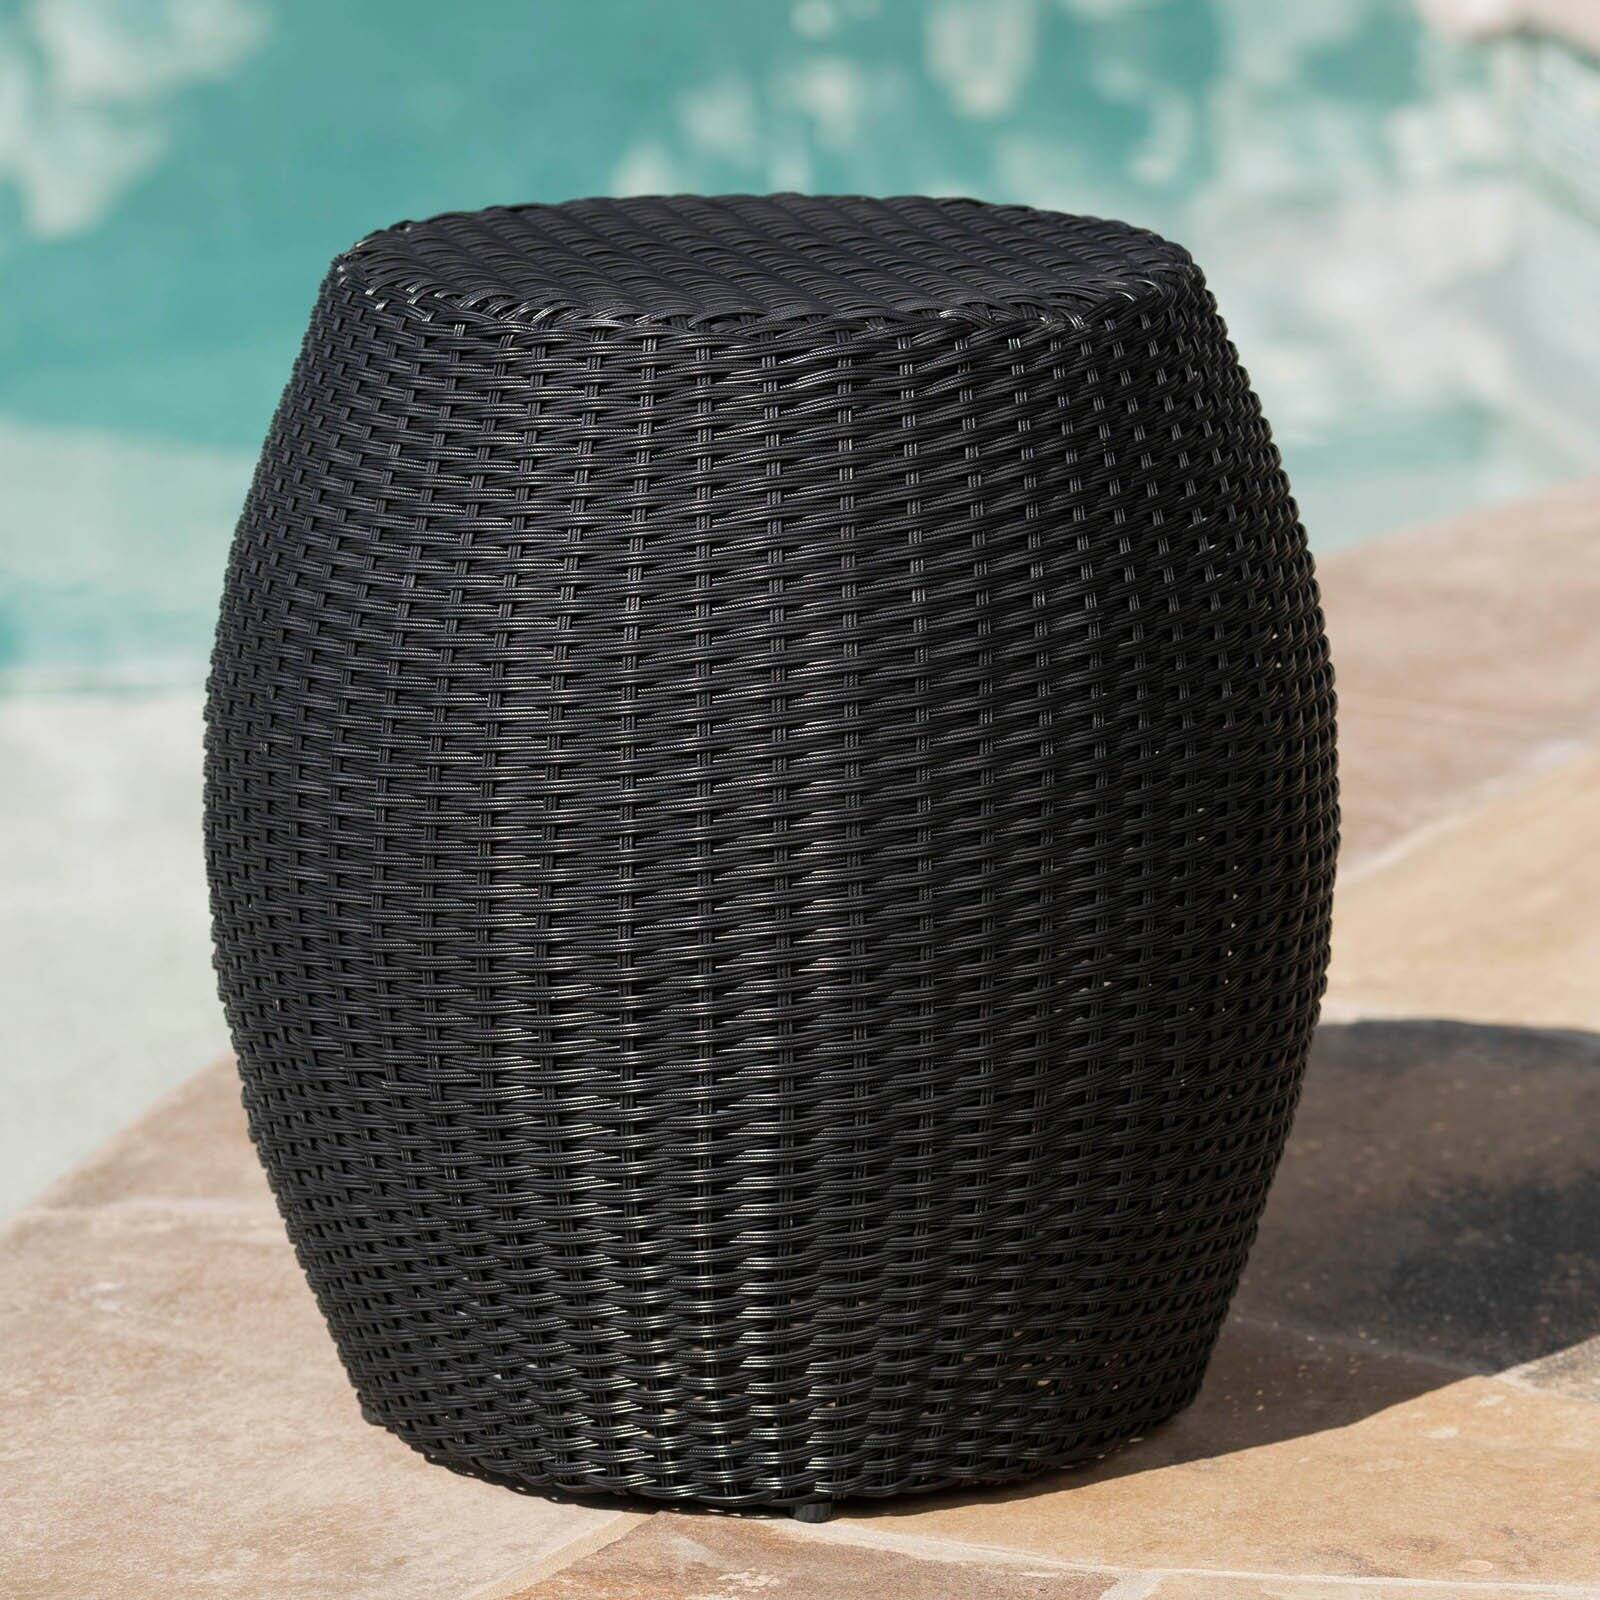 Canary Outdoor Wicker Side Table - image 2 of 2